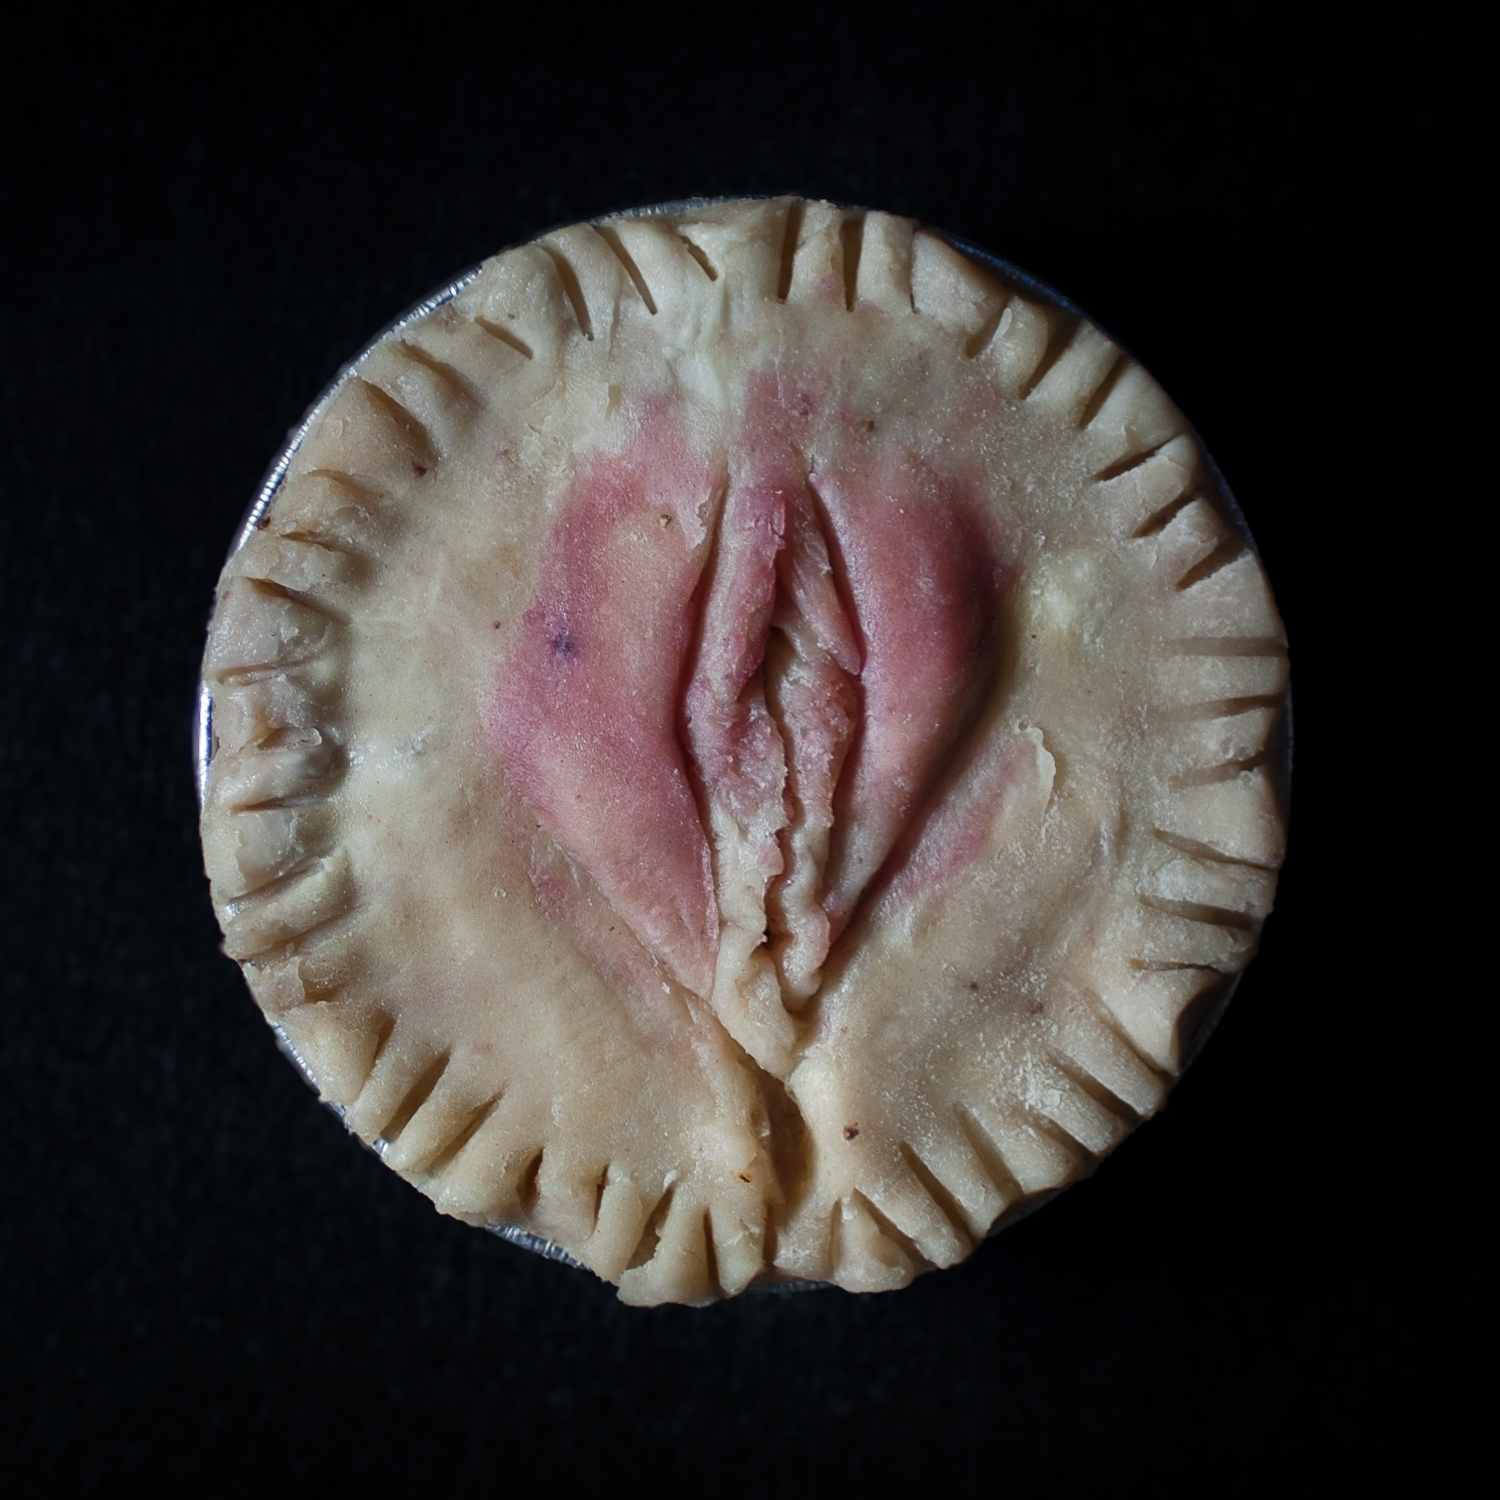 Pie 27, a pie sculpted to look like a vulva with natural food coloring to make the labia majora look pink
